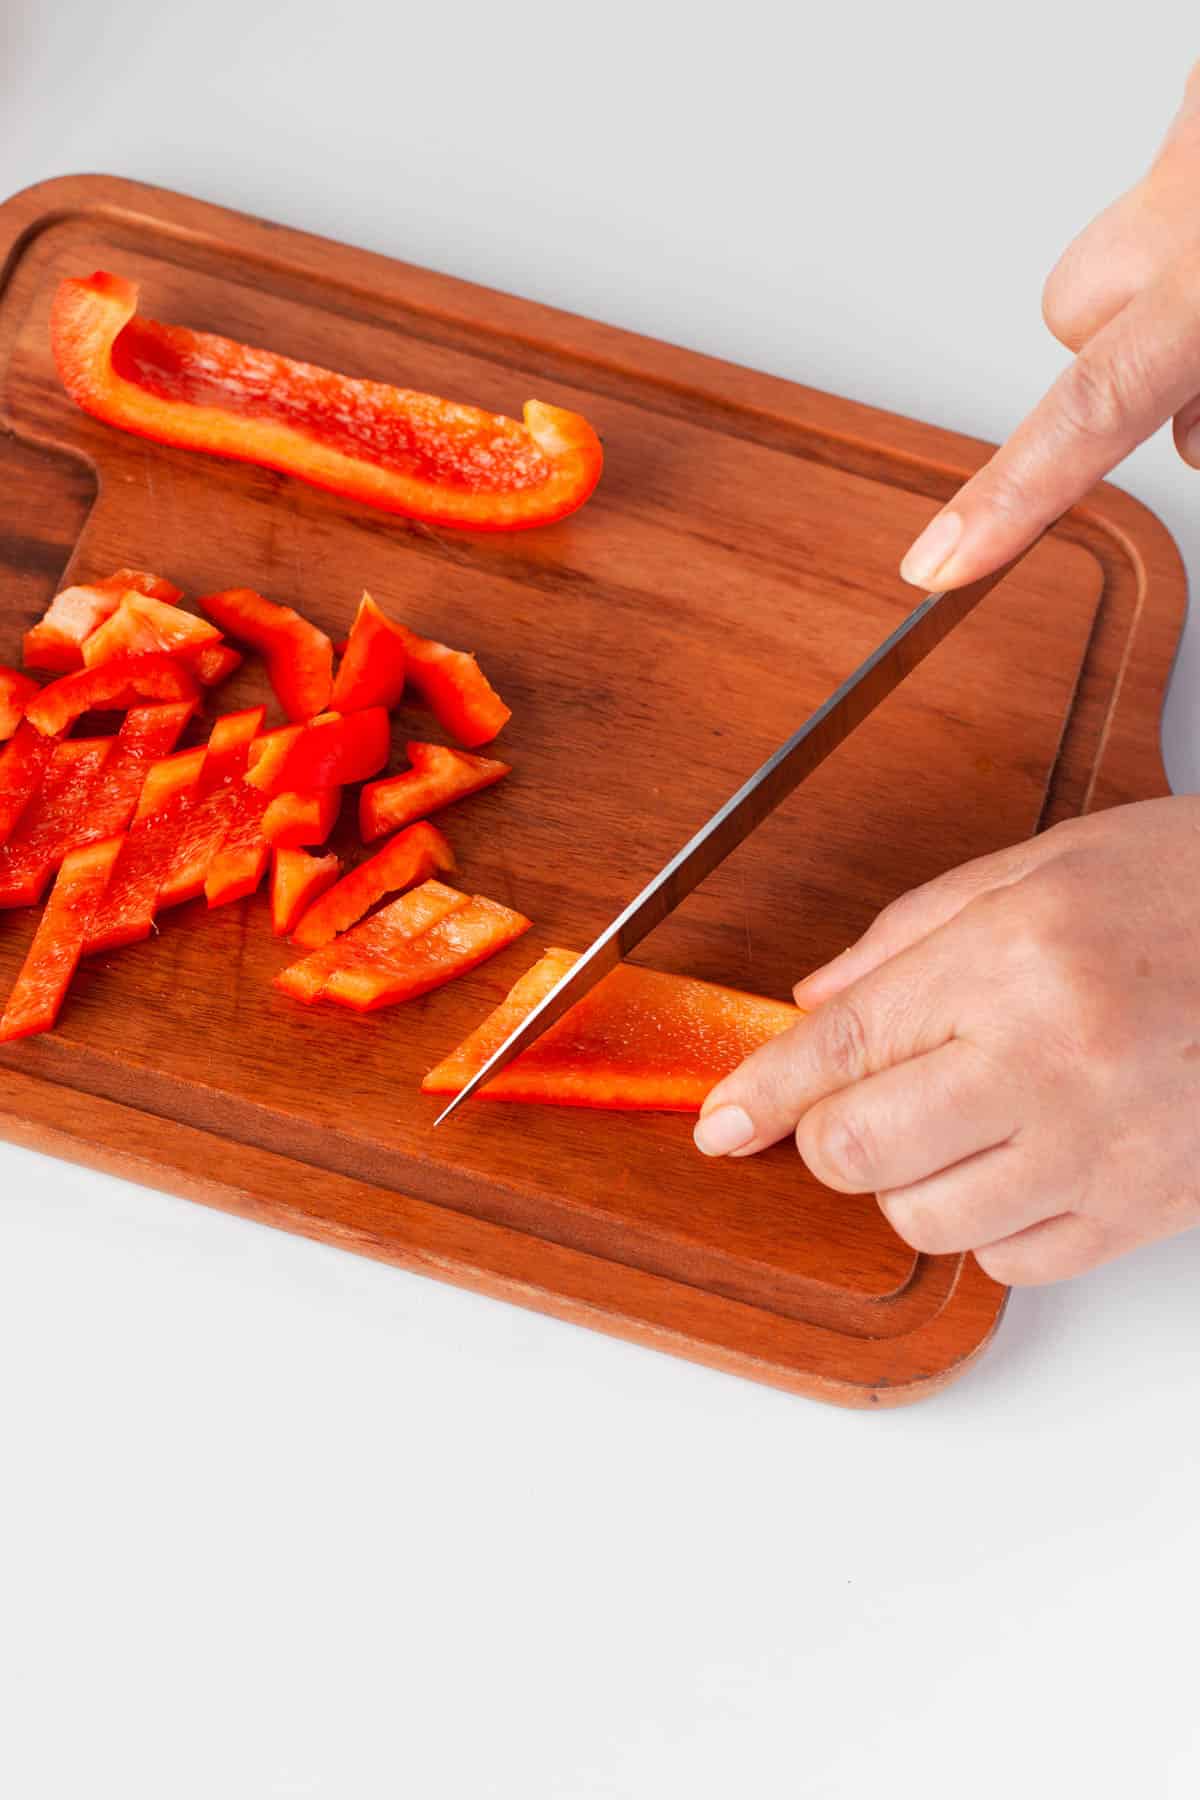 A hand slicing red bell pepper with a knife.